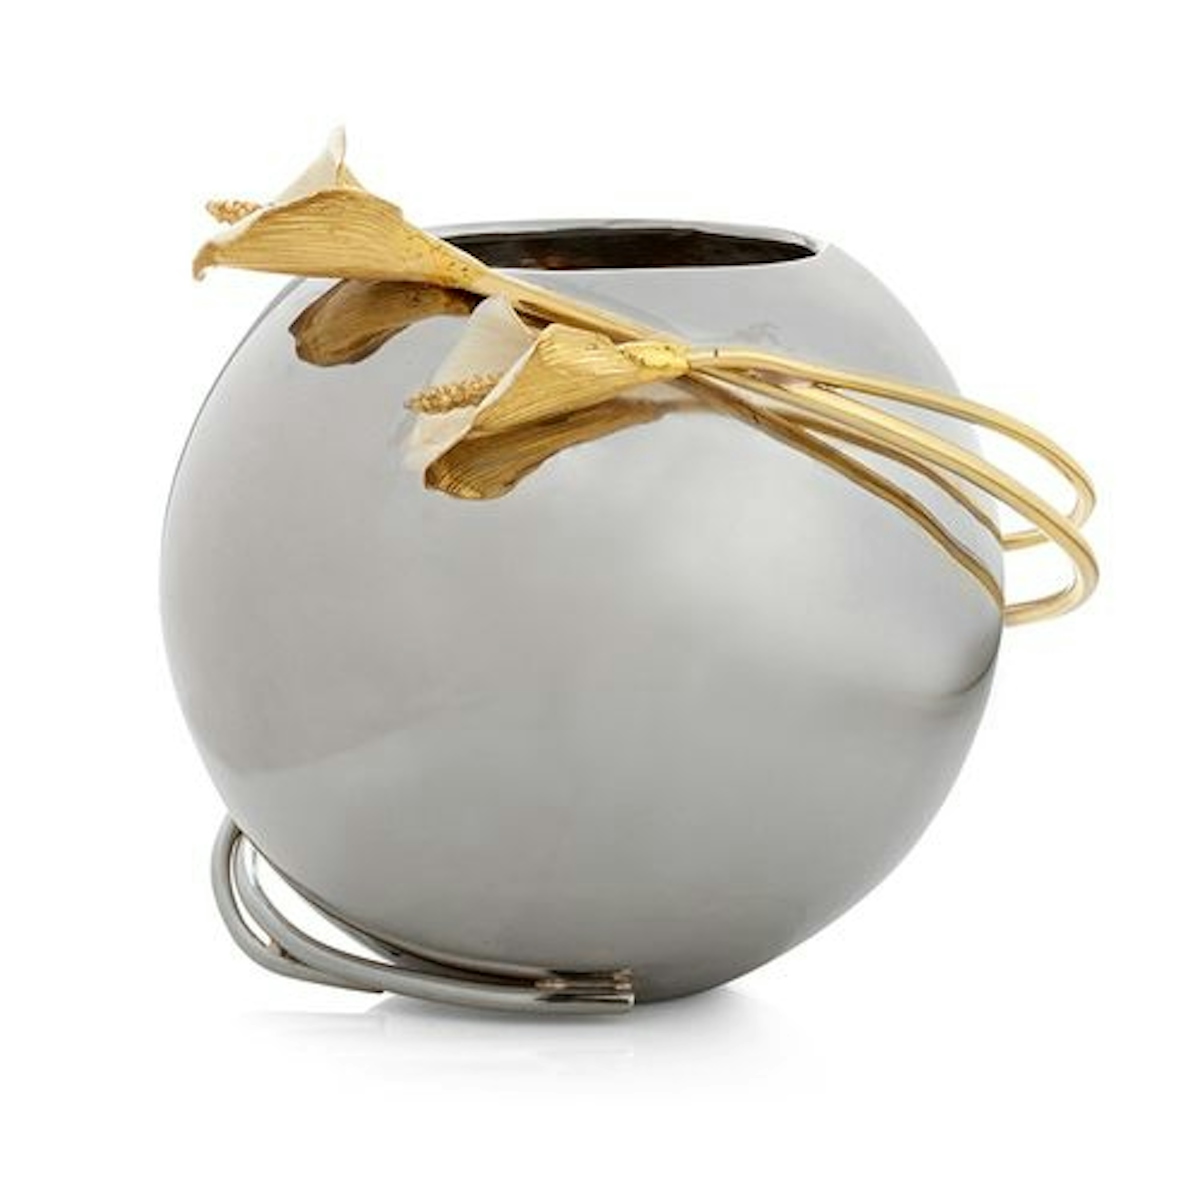 Calla Lily Rose Bowl Vase - 9 Best Decorative Vases To Buy For Your Home - LuxDeco.com